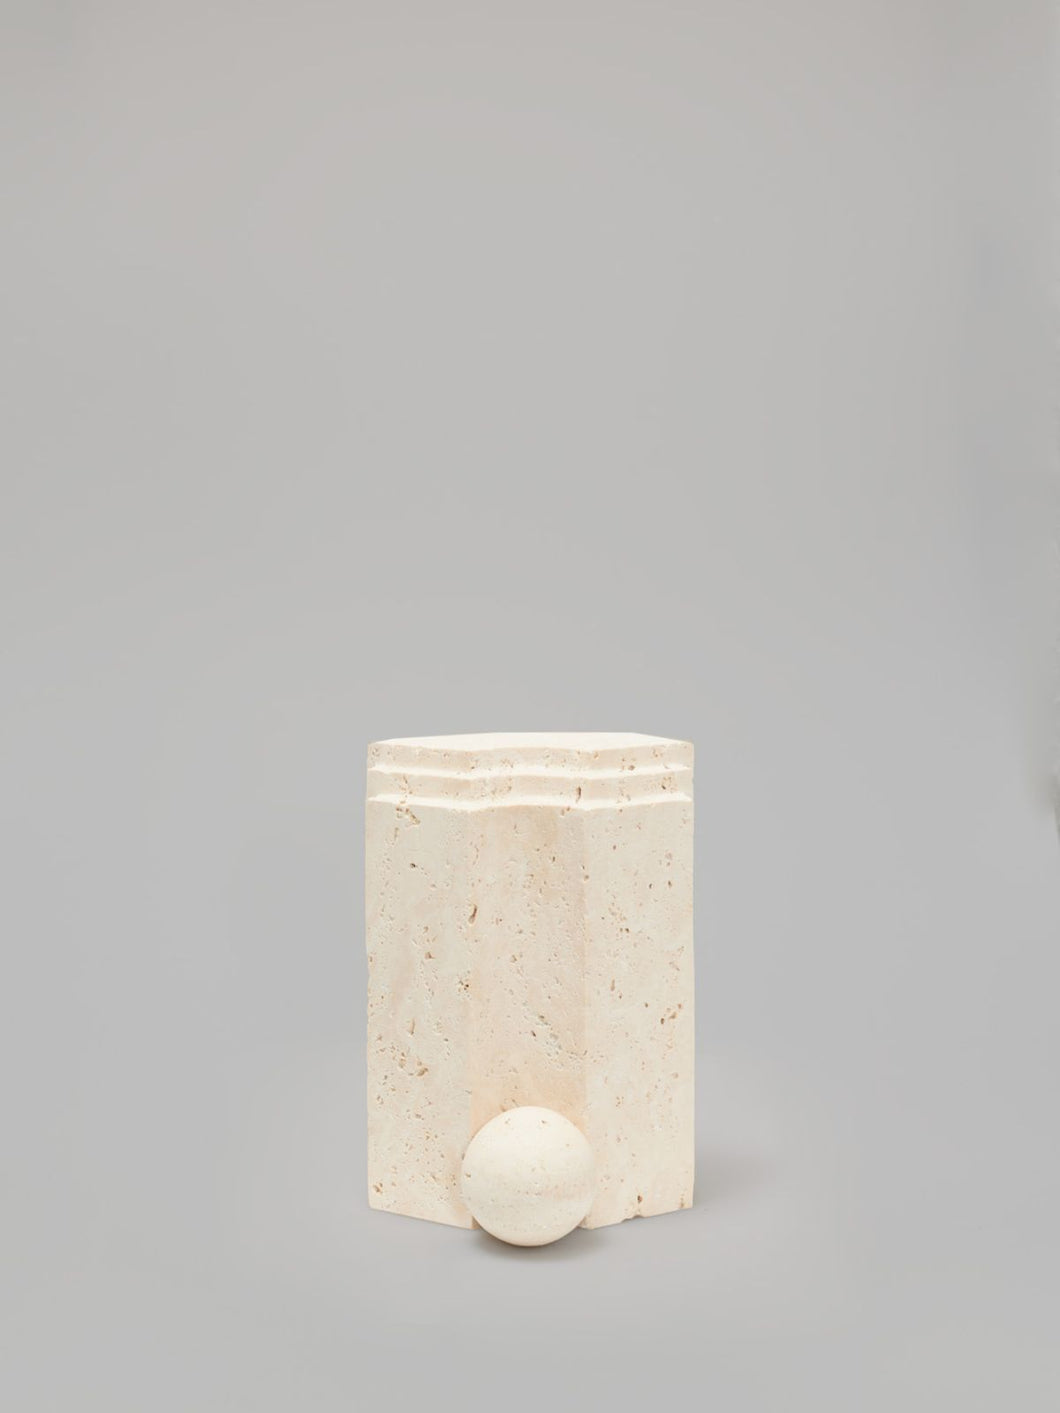 Ephyra - Travertine bookend by Signe Hytte